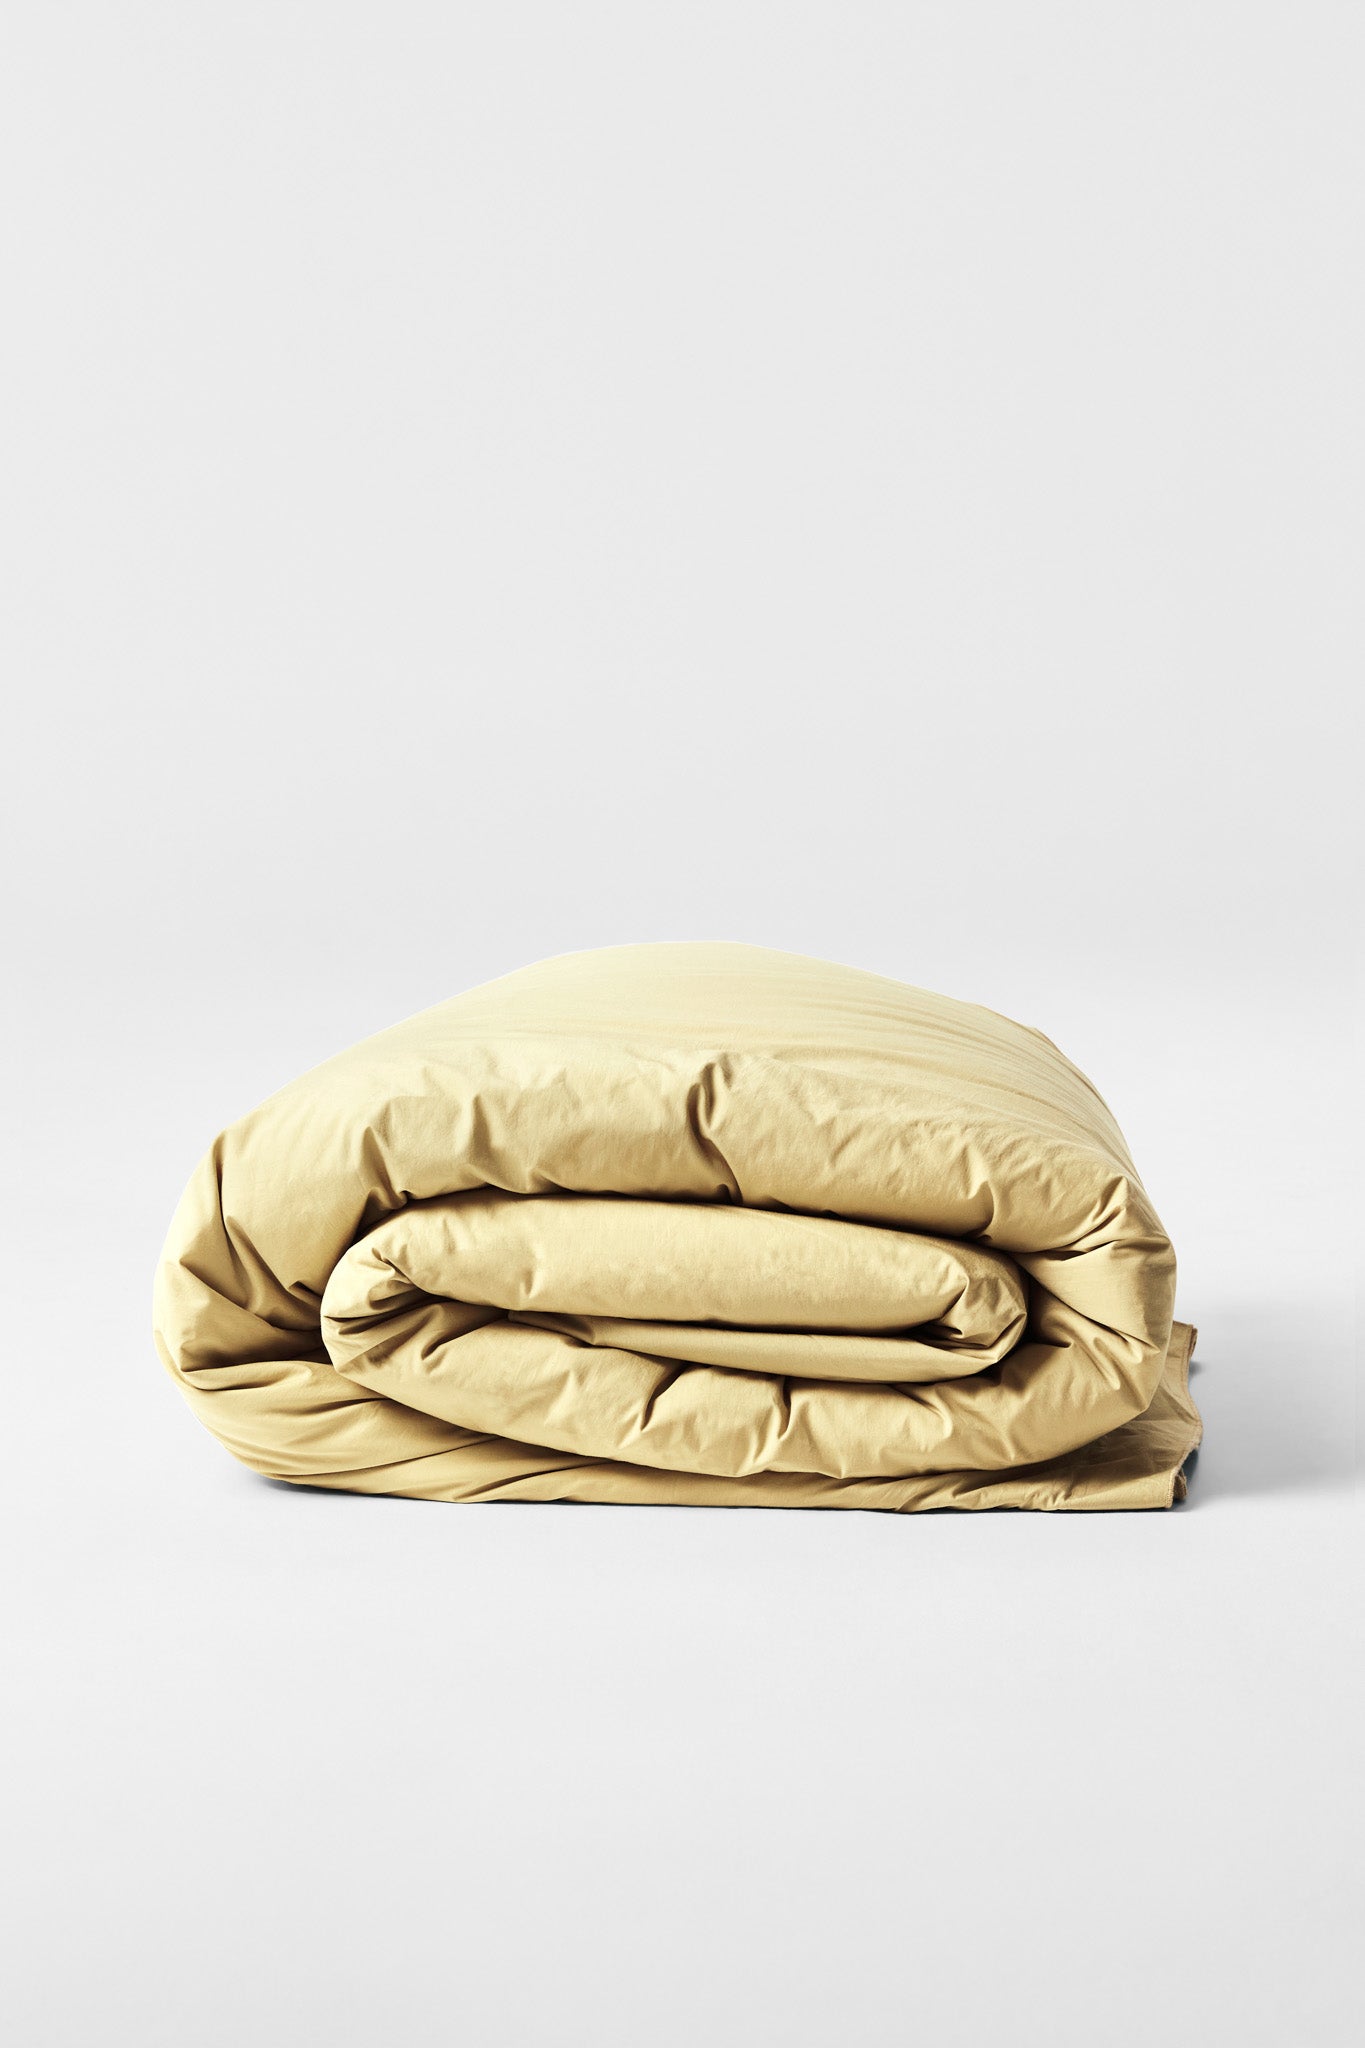 Duvet Cover in Maize